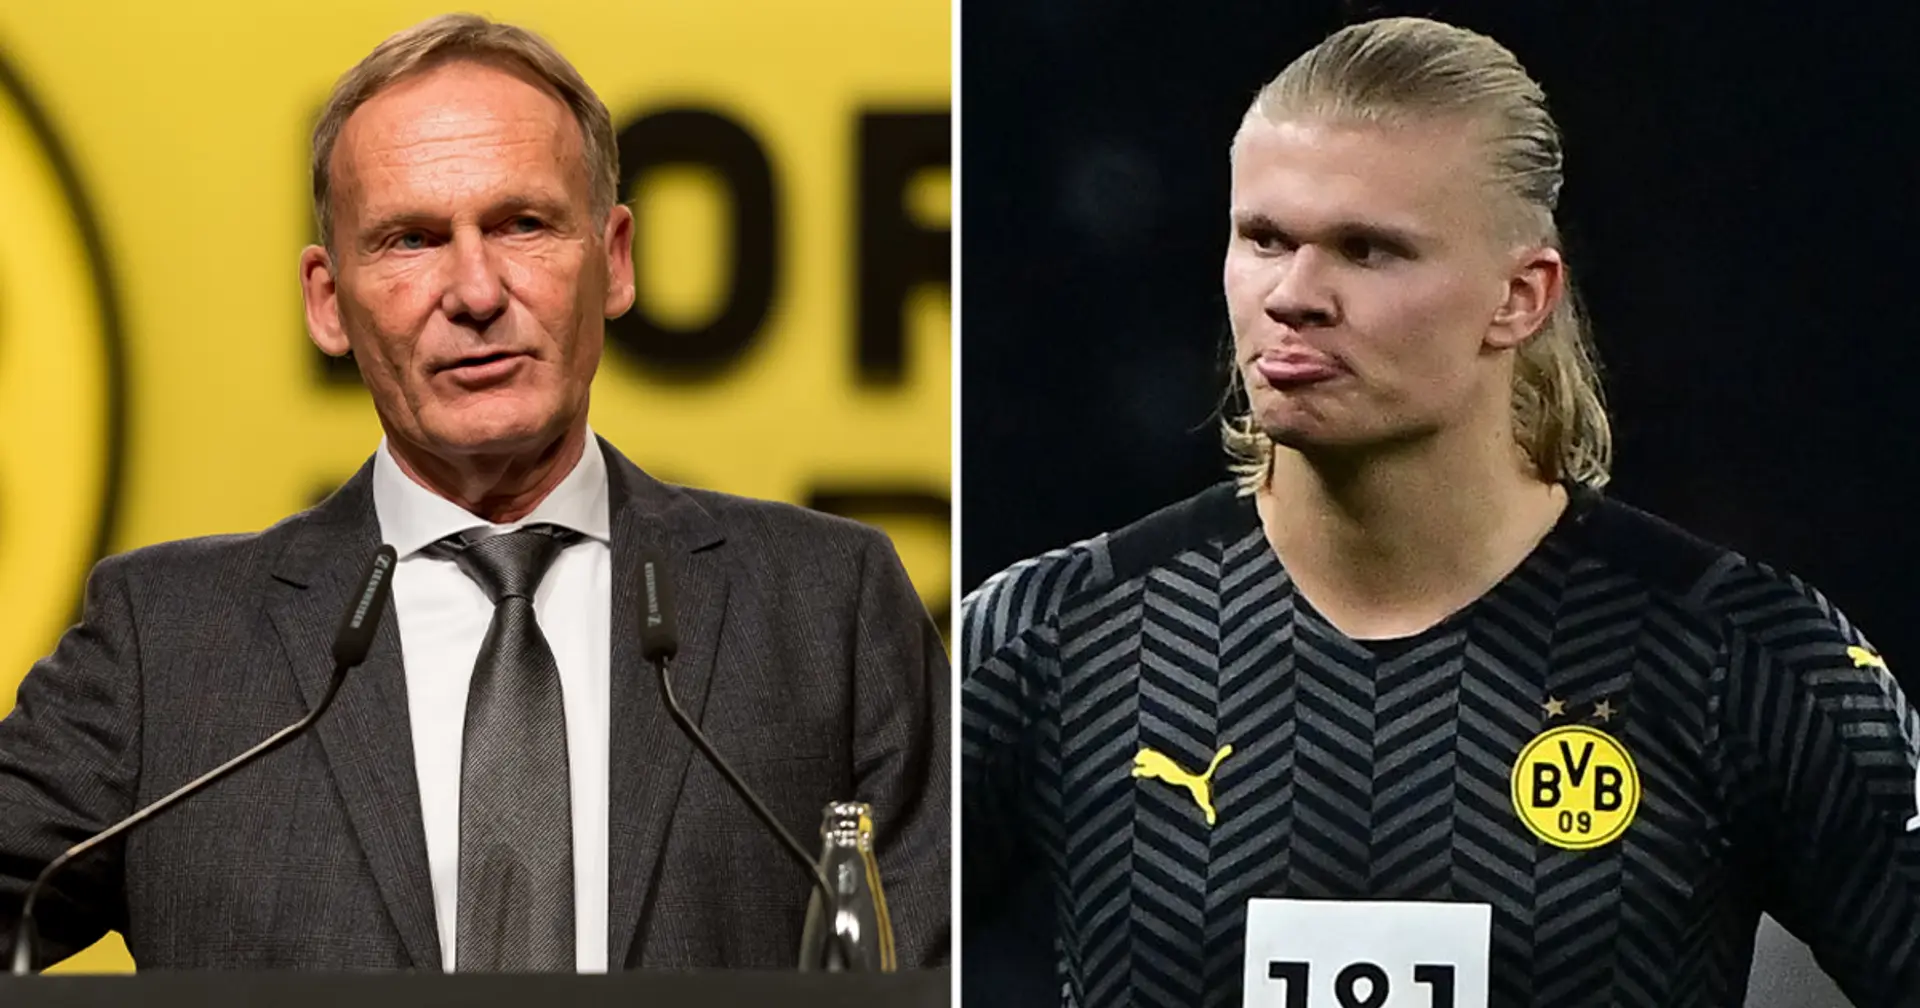 'He must have some understanding': Dortmund CEO reacts to Haaland's outburst